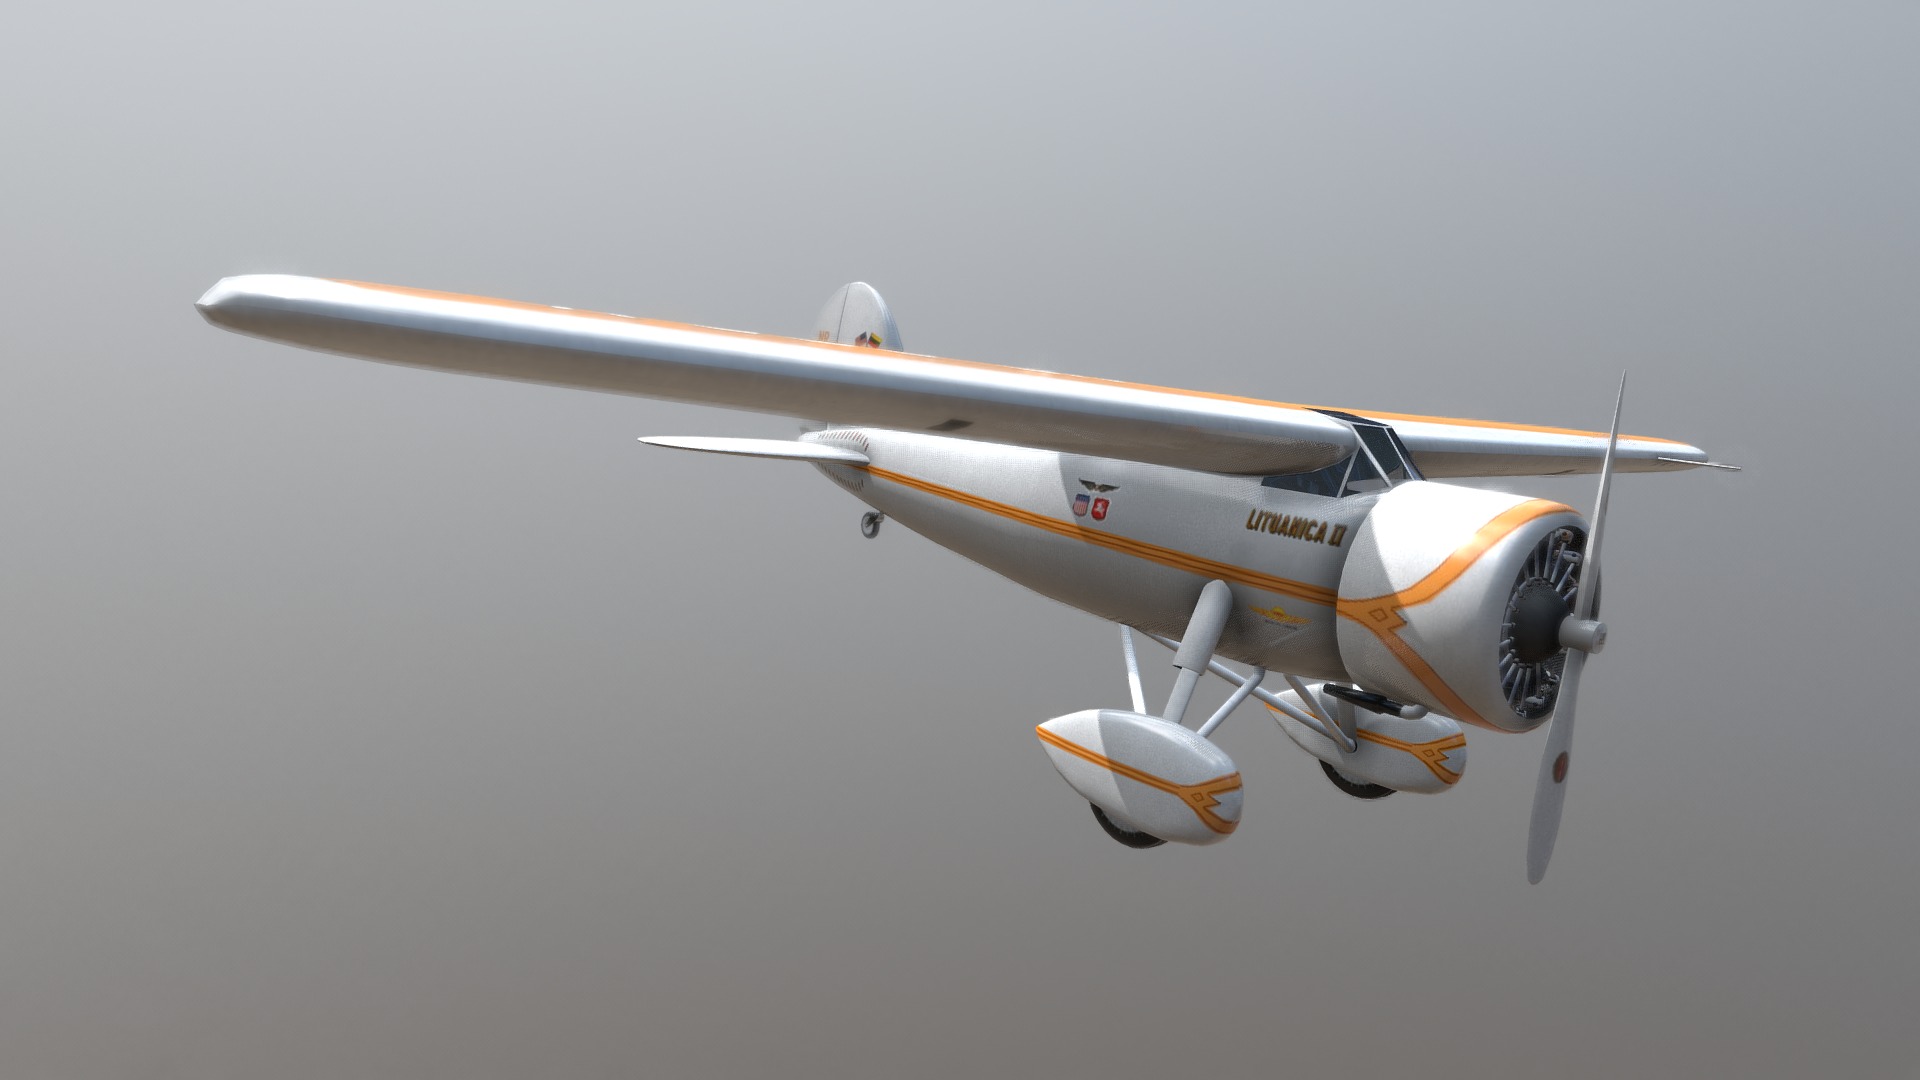 3D model Lockheed L 5B Vega Lituanica 2 NR 926 Y - This is a 3D model of the Lockheed L 5B Vega Lituanica 2 NR 926 Y. The 3D model is about a small airplane flying in the sky.